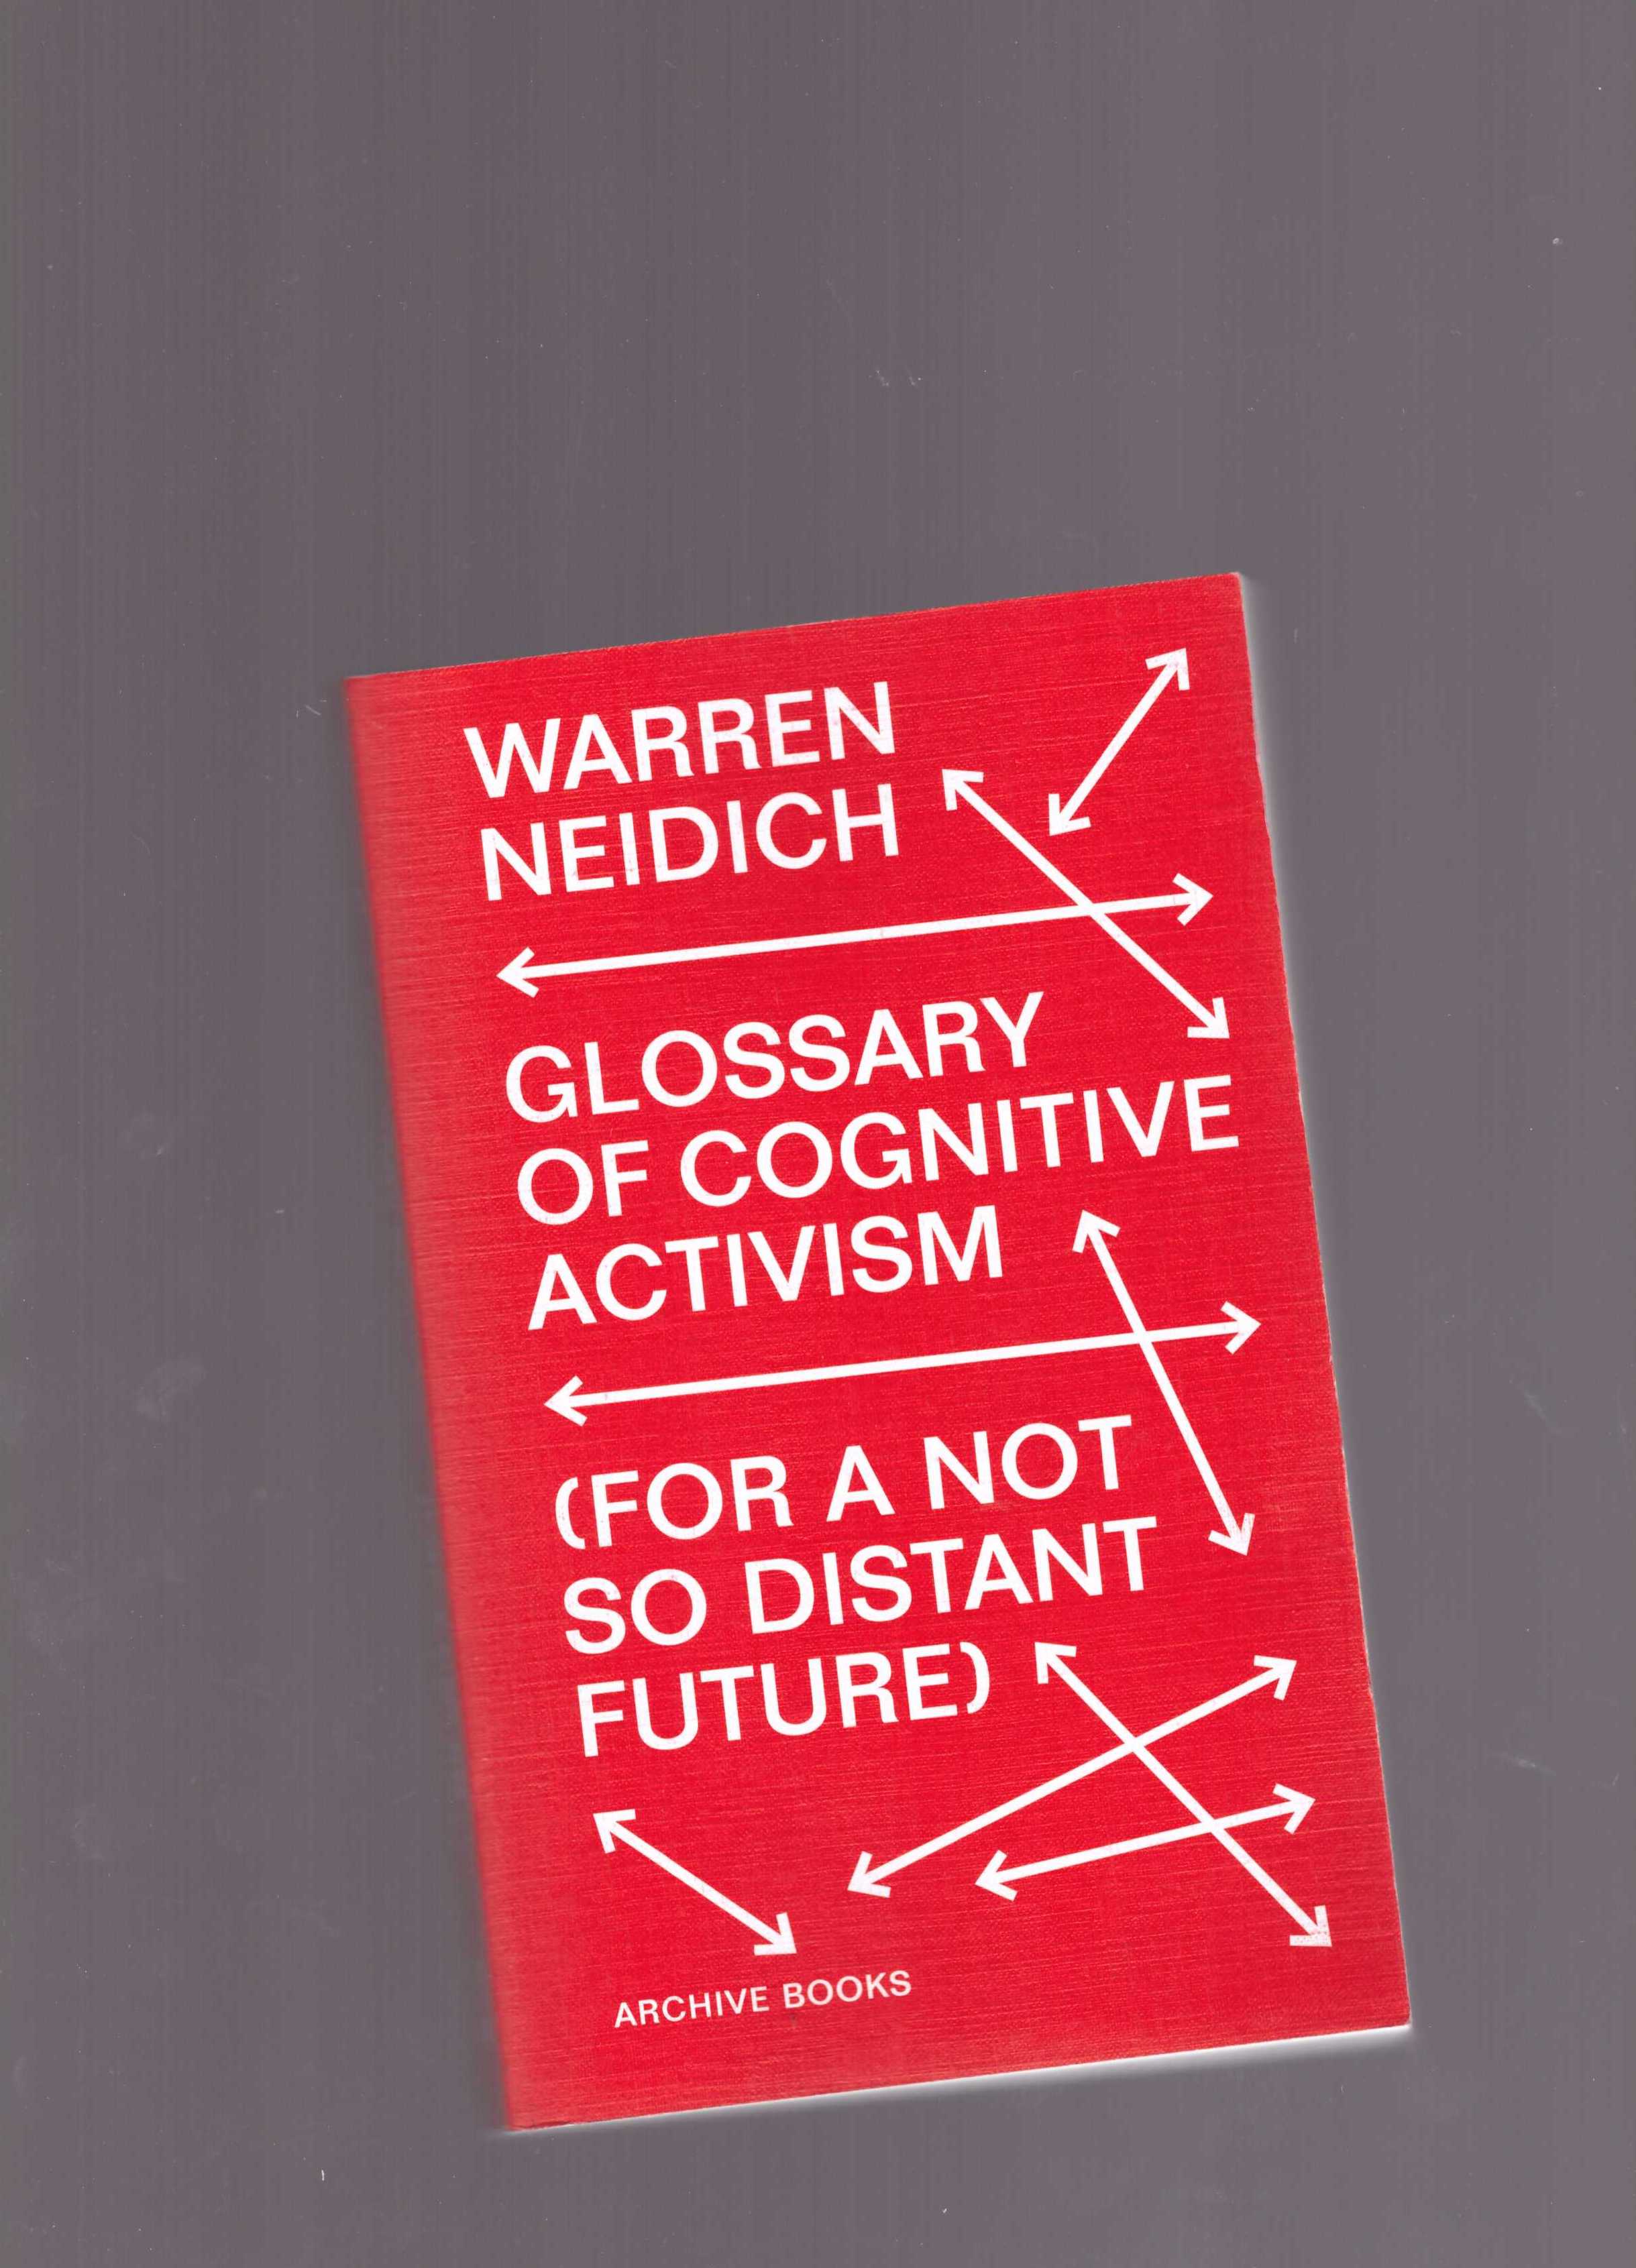 NEIDICH, Warren - The Glossary of Cognitive Activism (For a Not So Distant Future)